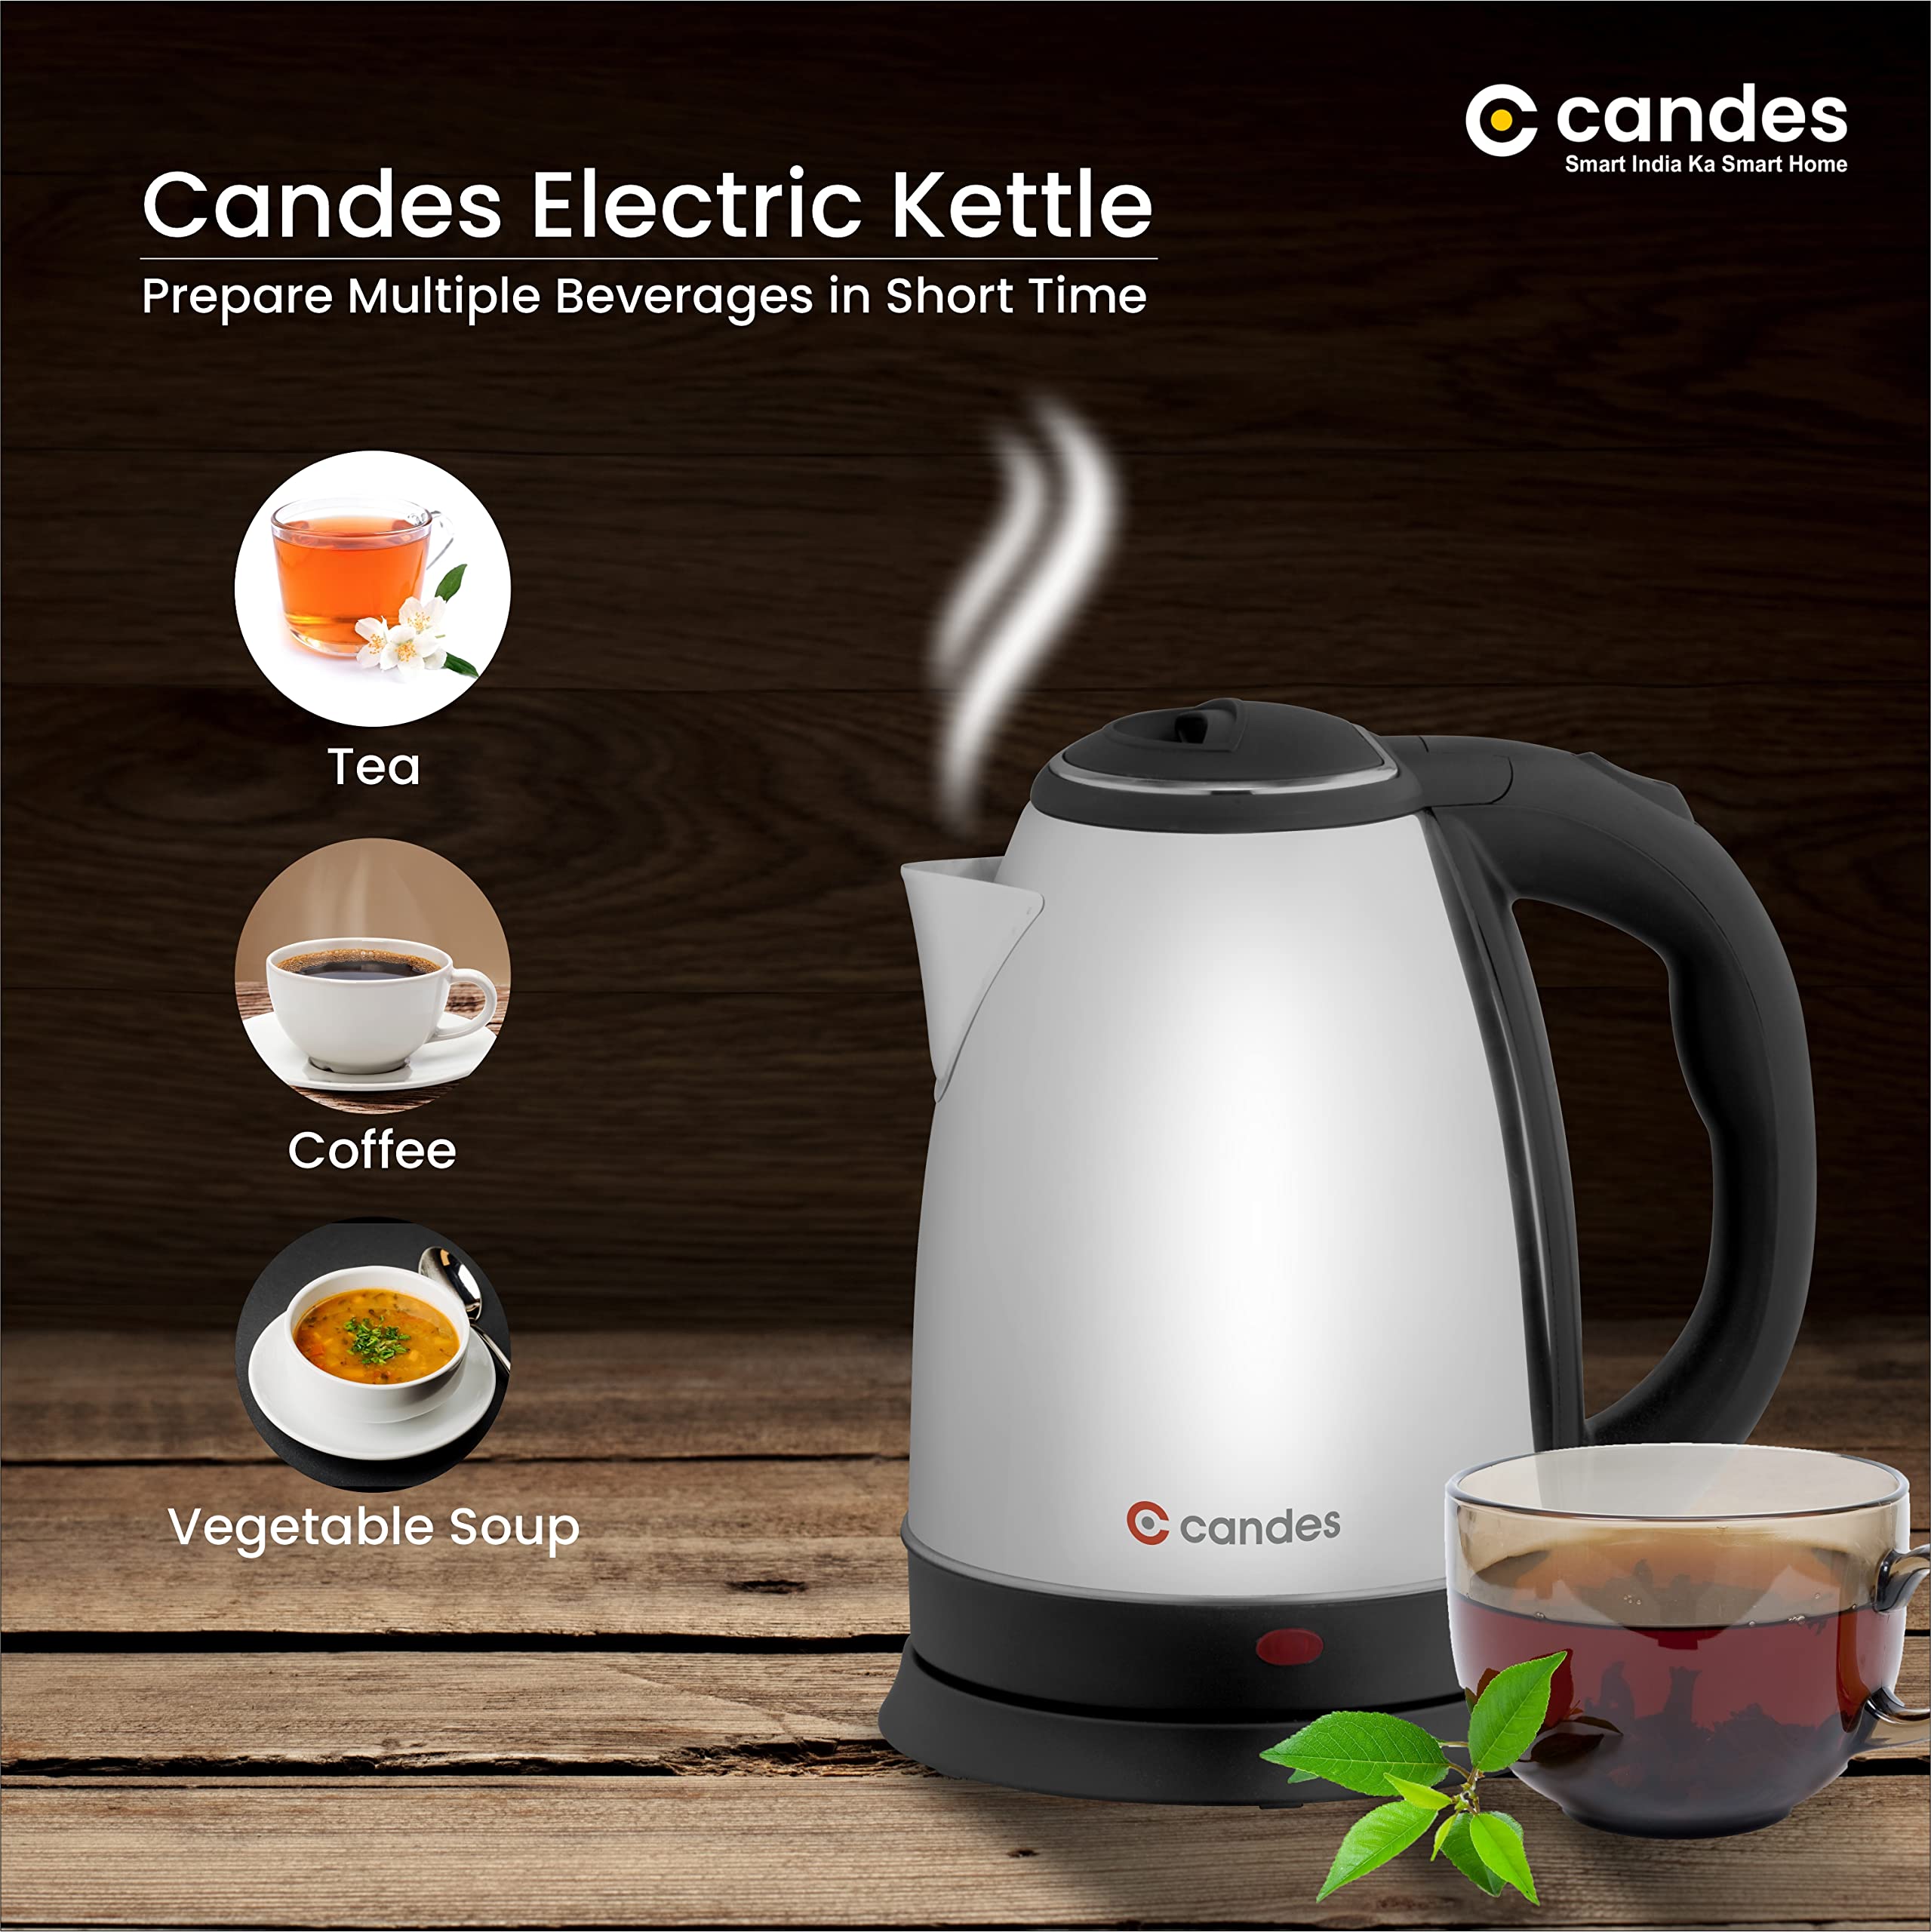 Candes Boiler Electric Kettle with Stainless Steel Body, 2 litres boiler for Water, instant noodles, soup etc.